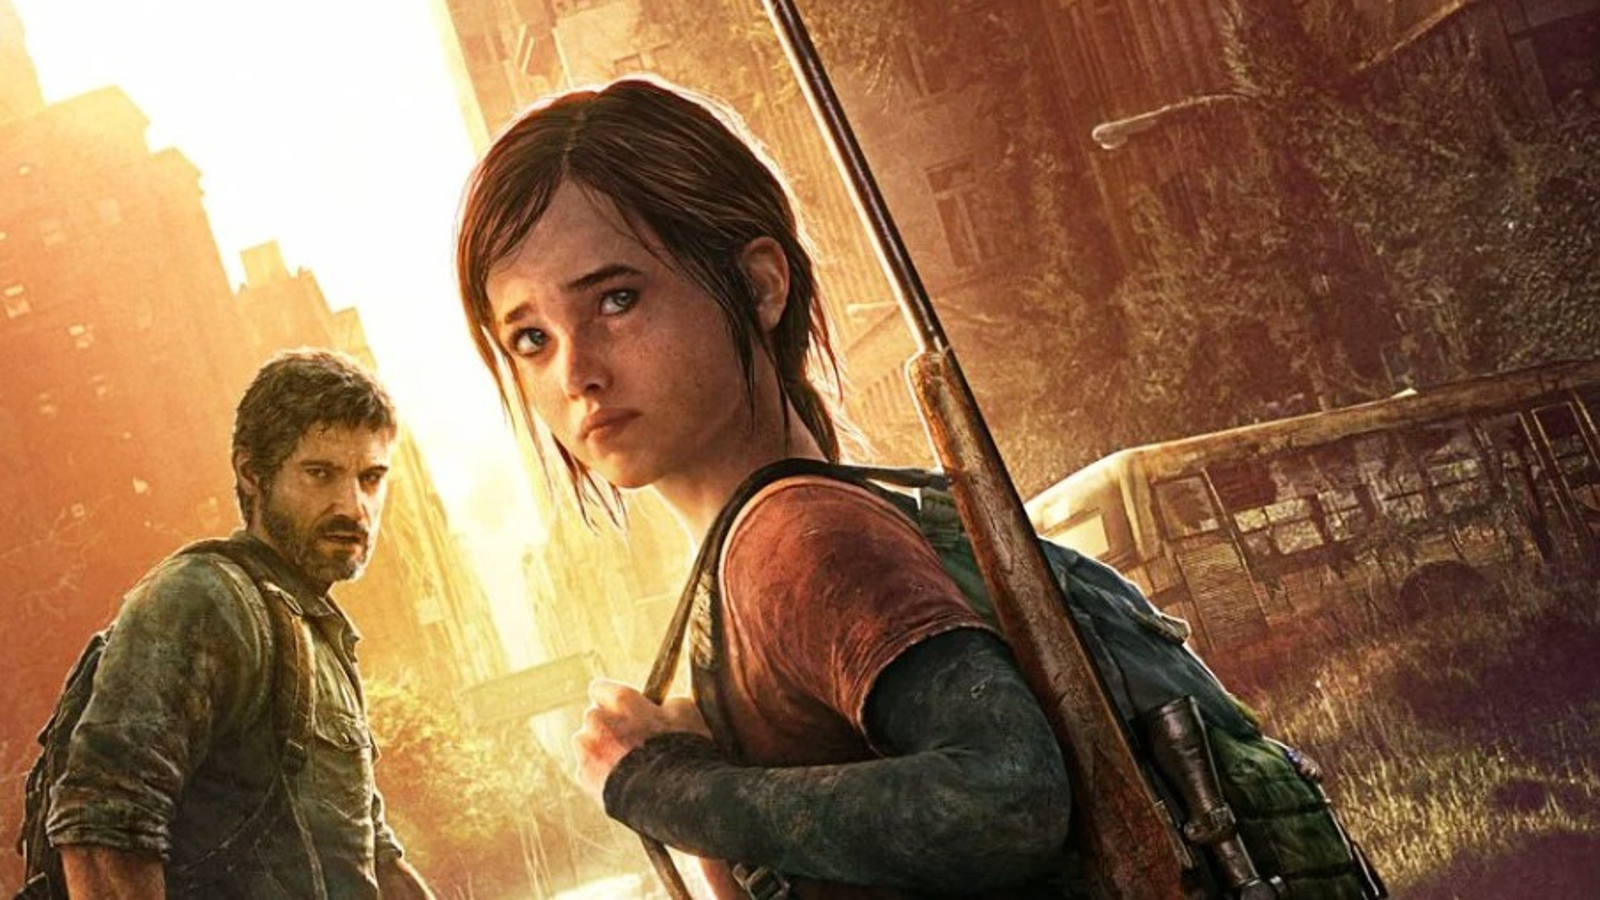 The Last of Us Set Footage Teases New Scenes That Explore Its Backstory